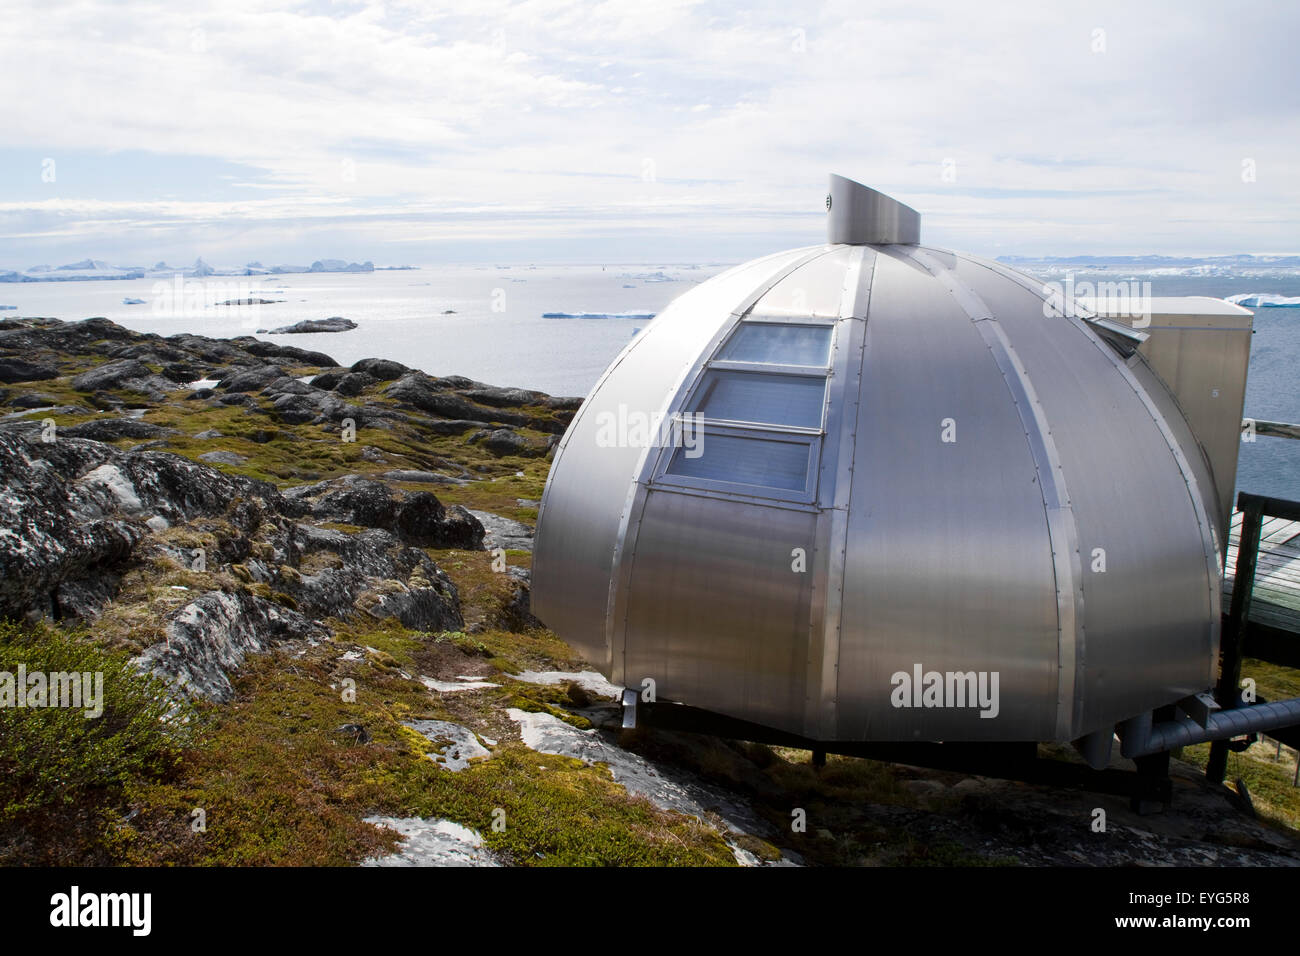 Aluminium 'igloos' At The Hotel Arctic In Ilulissat On The West Coast Of Greenland, The Most Northerly 4 Star Hotel. Greenland. Stock Photo